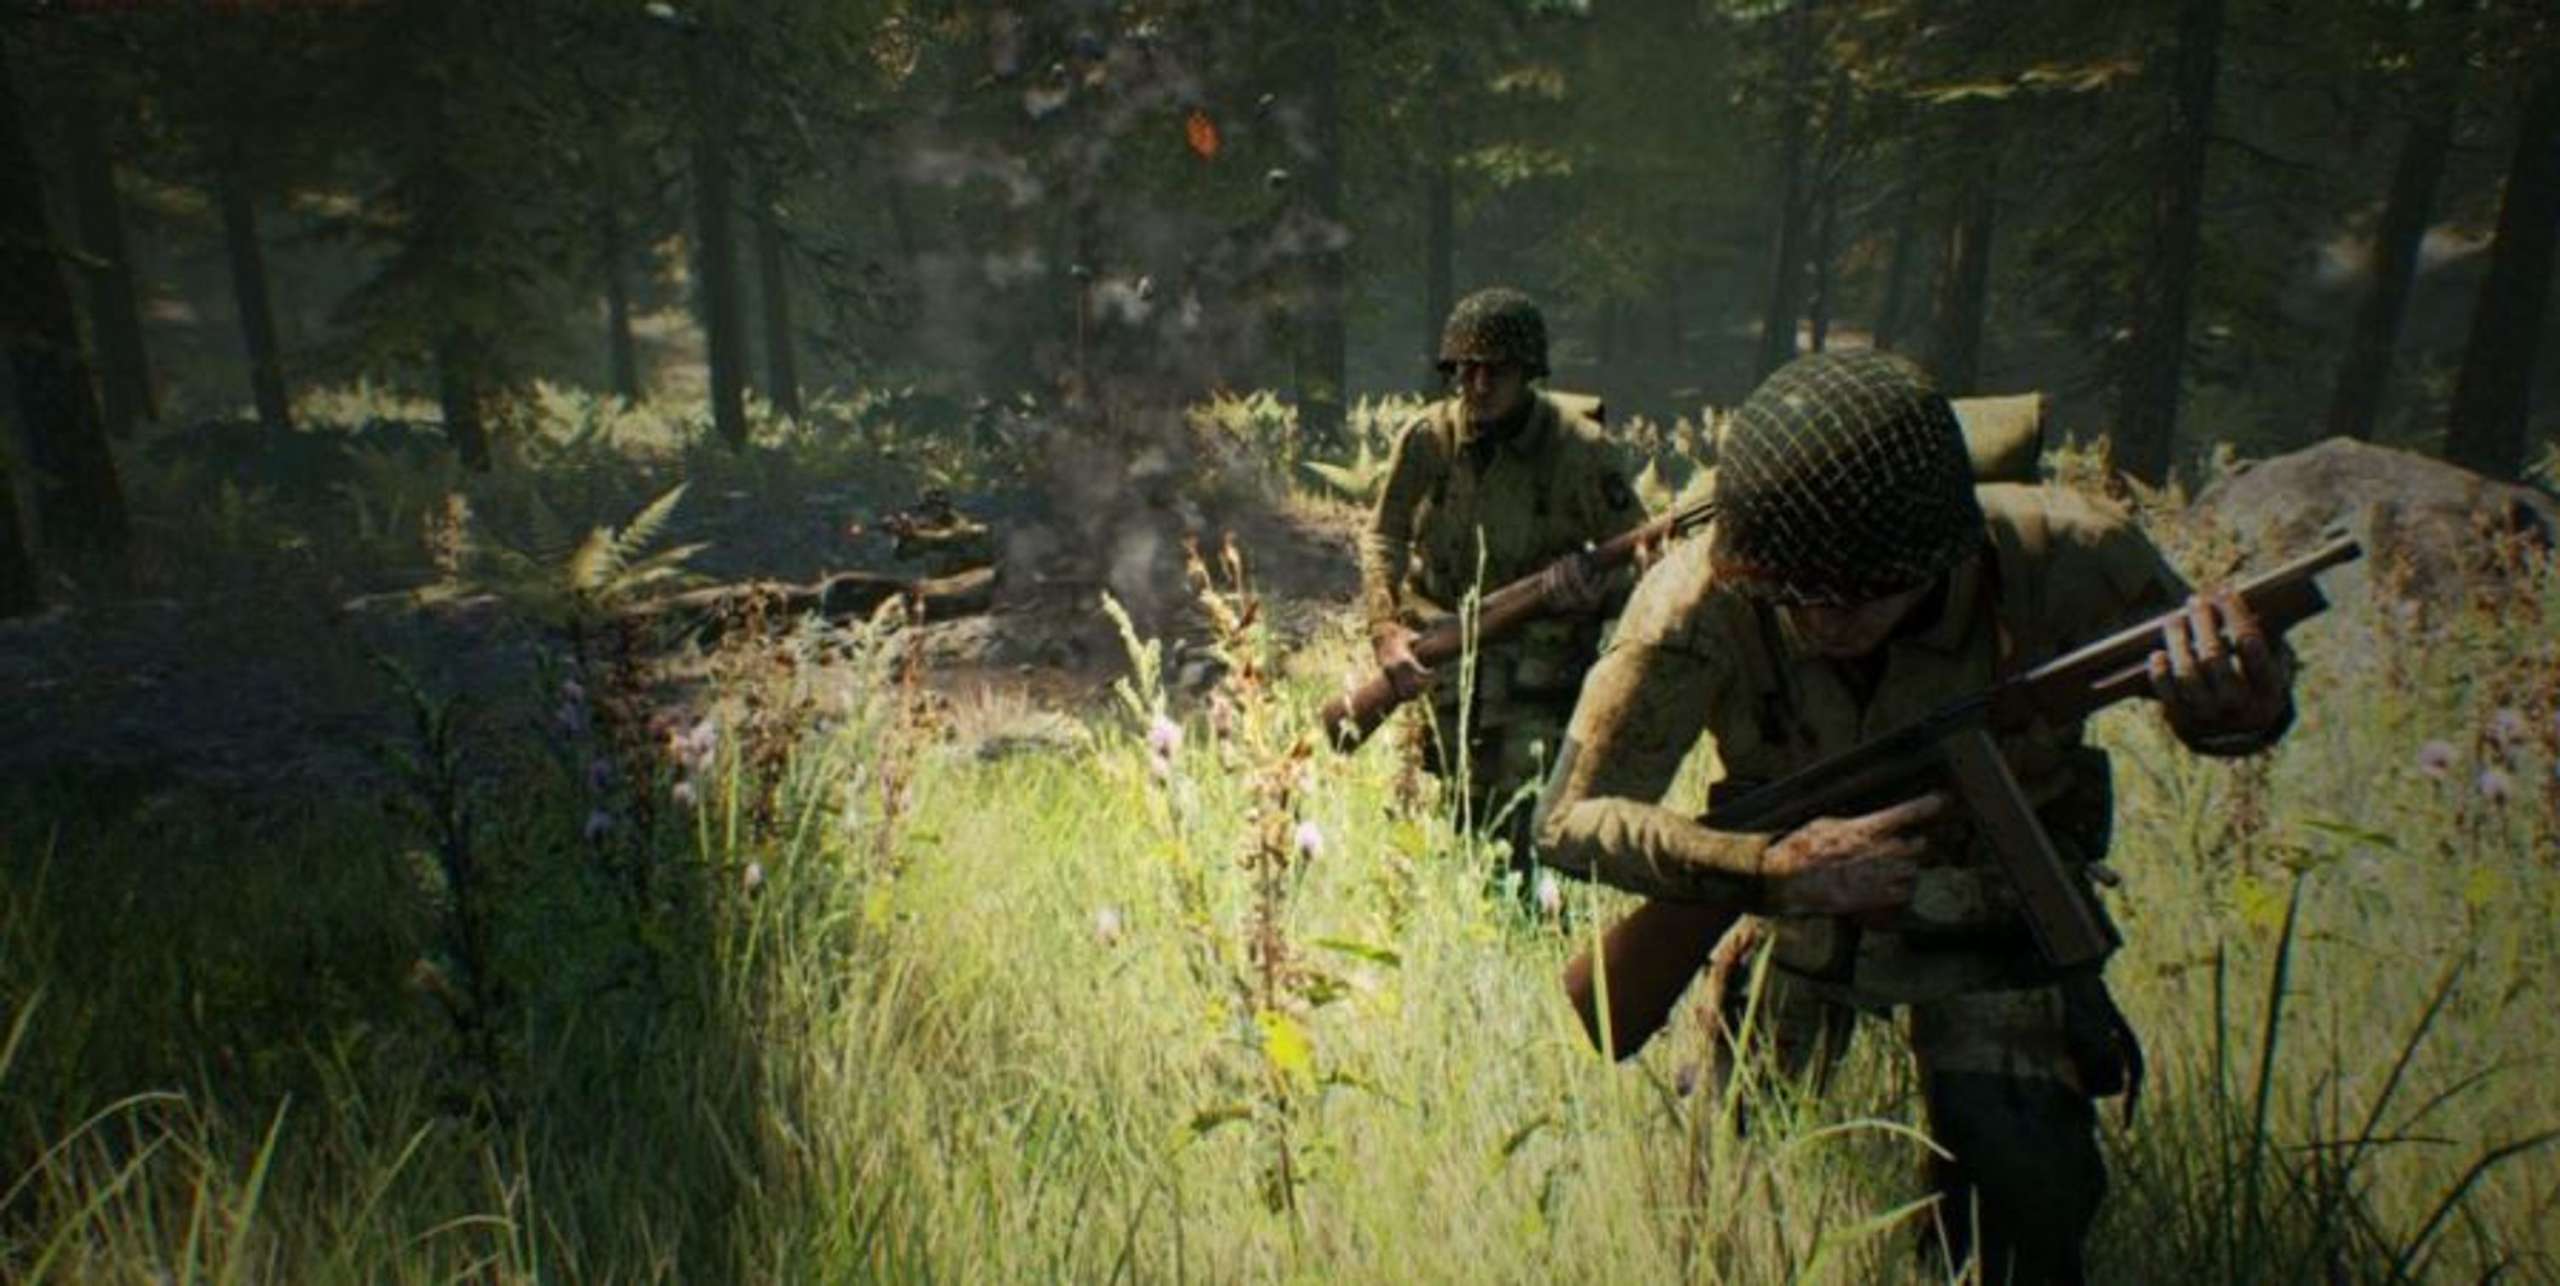 Bulkhead, The Creator Of Battalion 1944, Officially Ends Their Collaboration With Square Enix